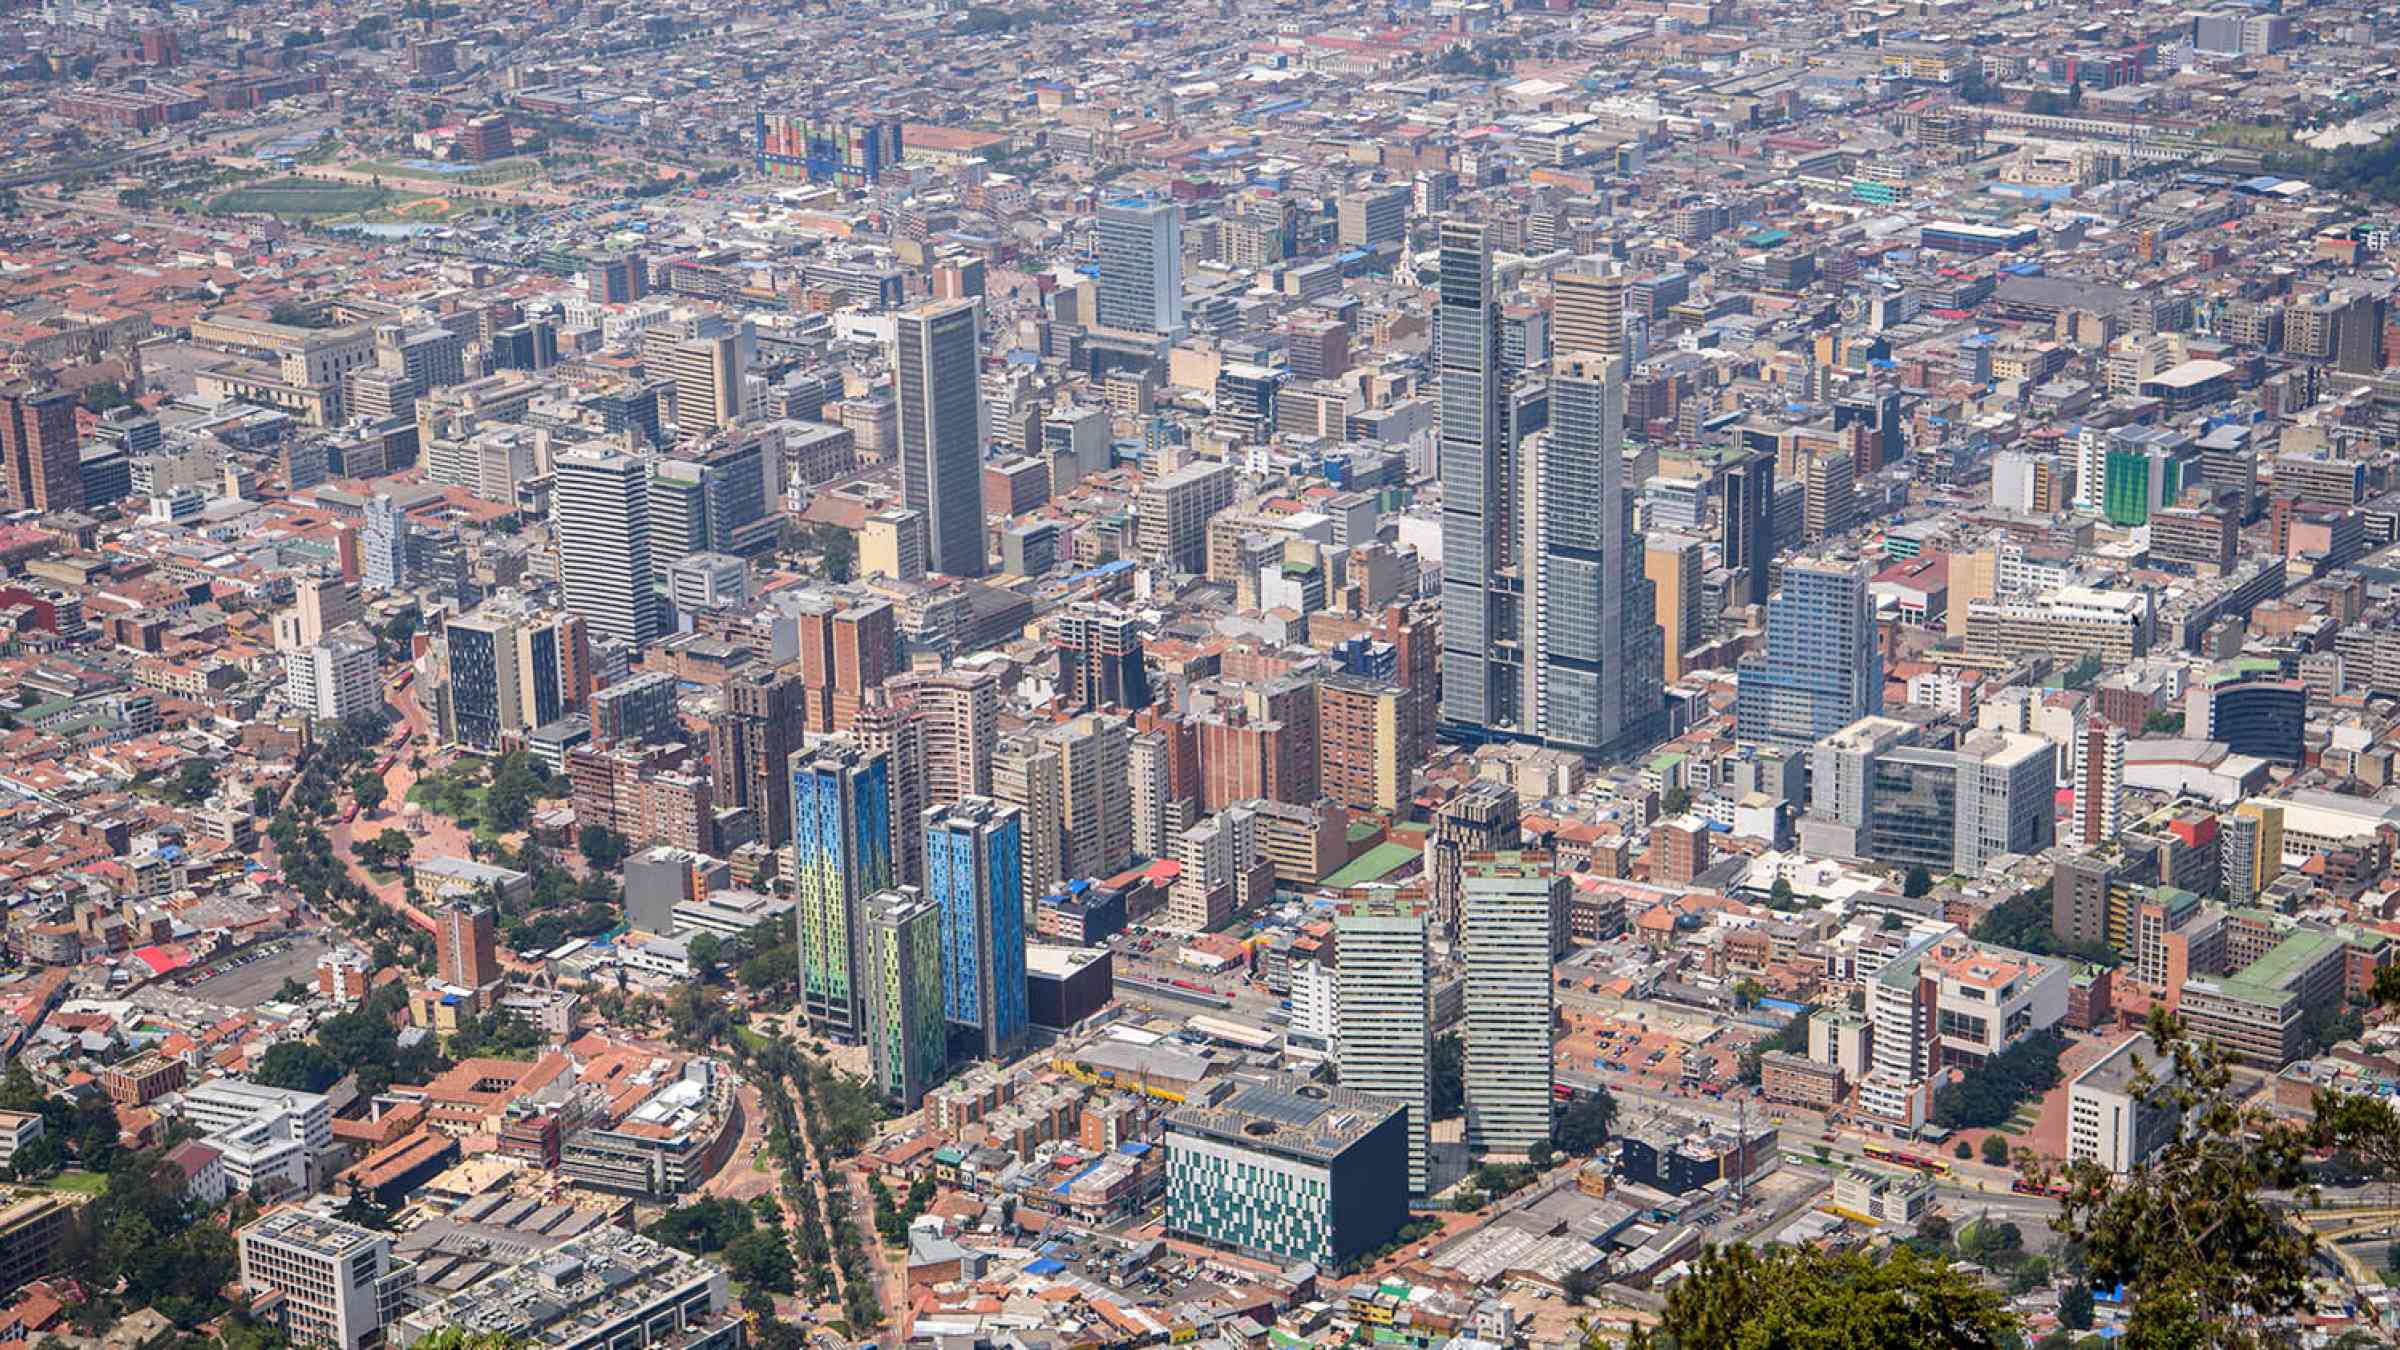 Aerial shot of the gigantic city of Bogota, Colombia.